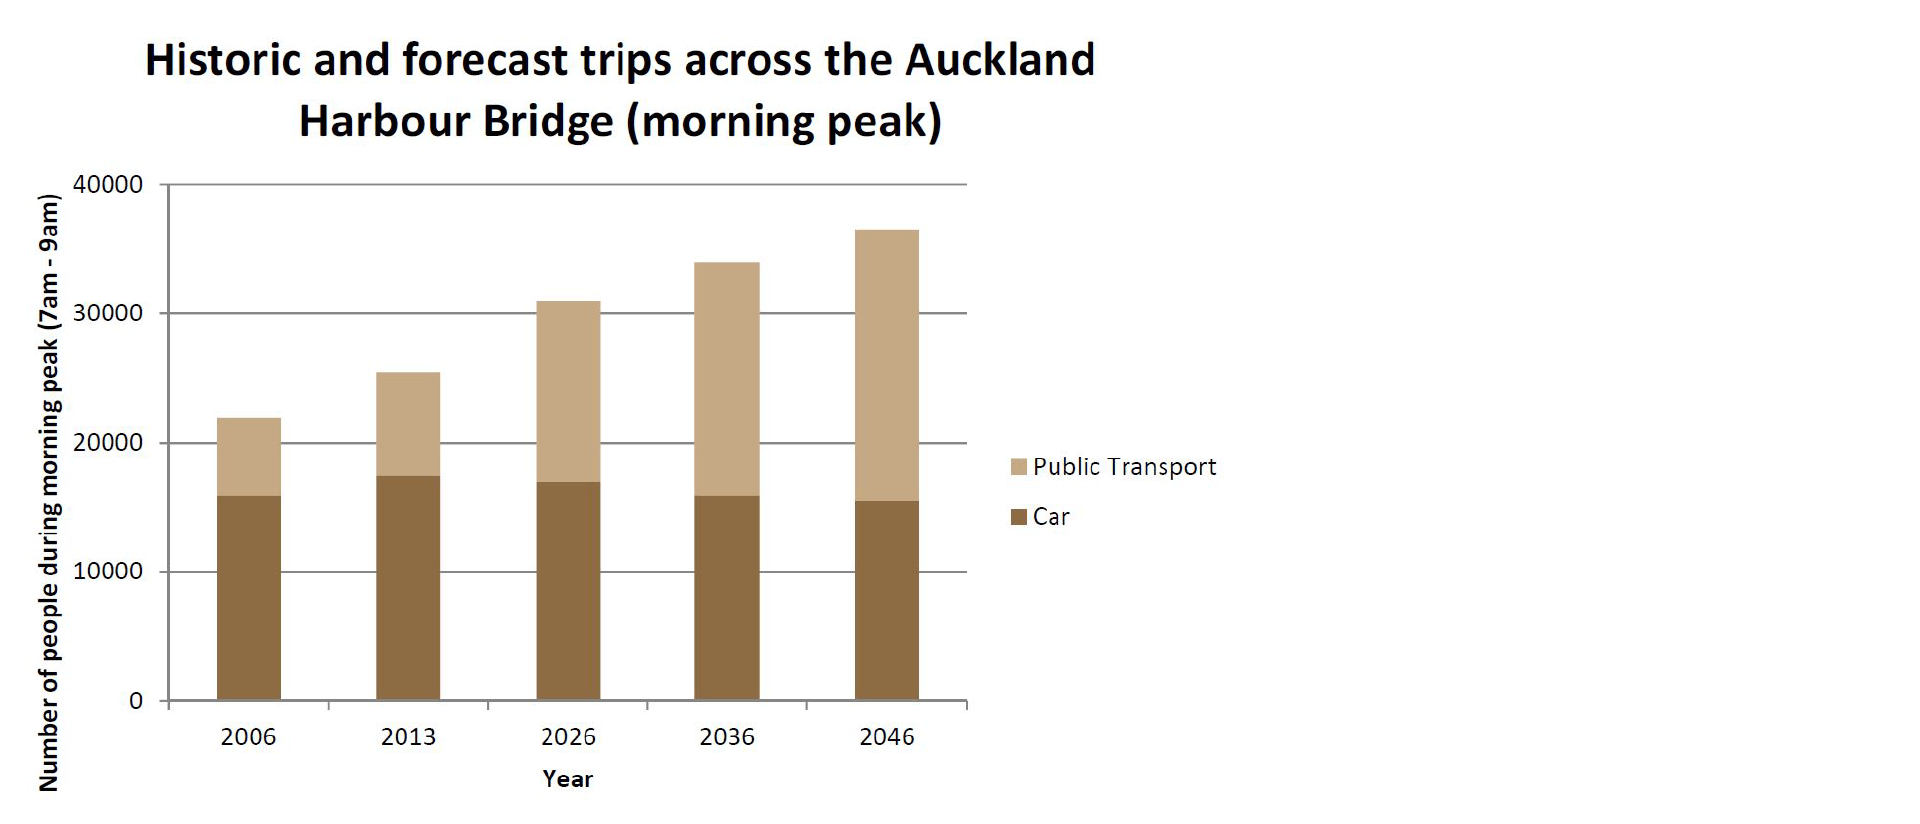 Graph showing the historic and forecast of public transport and car trips across the Auckland Harbour Bridge from 7am to 9am in 2006, 2013, 2026, 2036 and 2046.